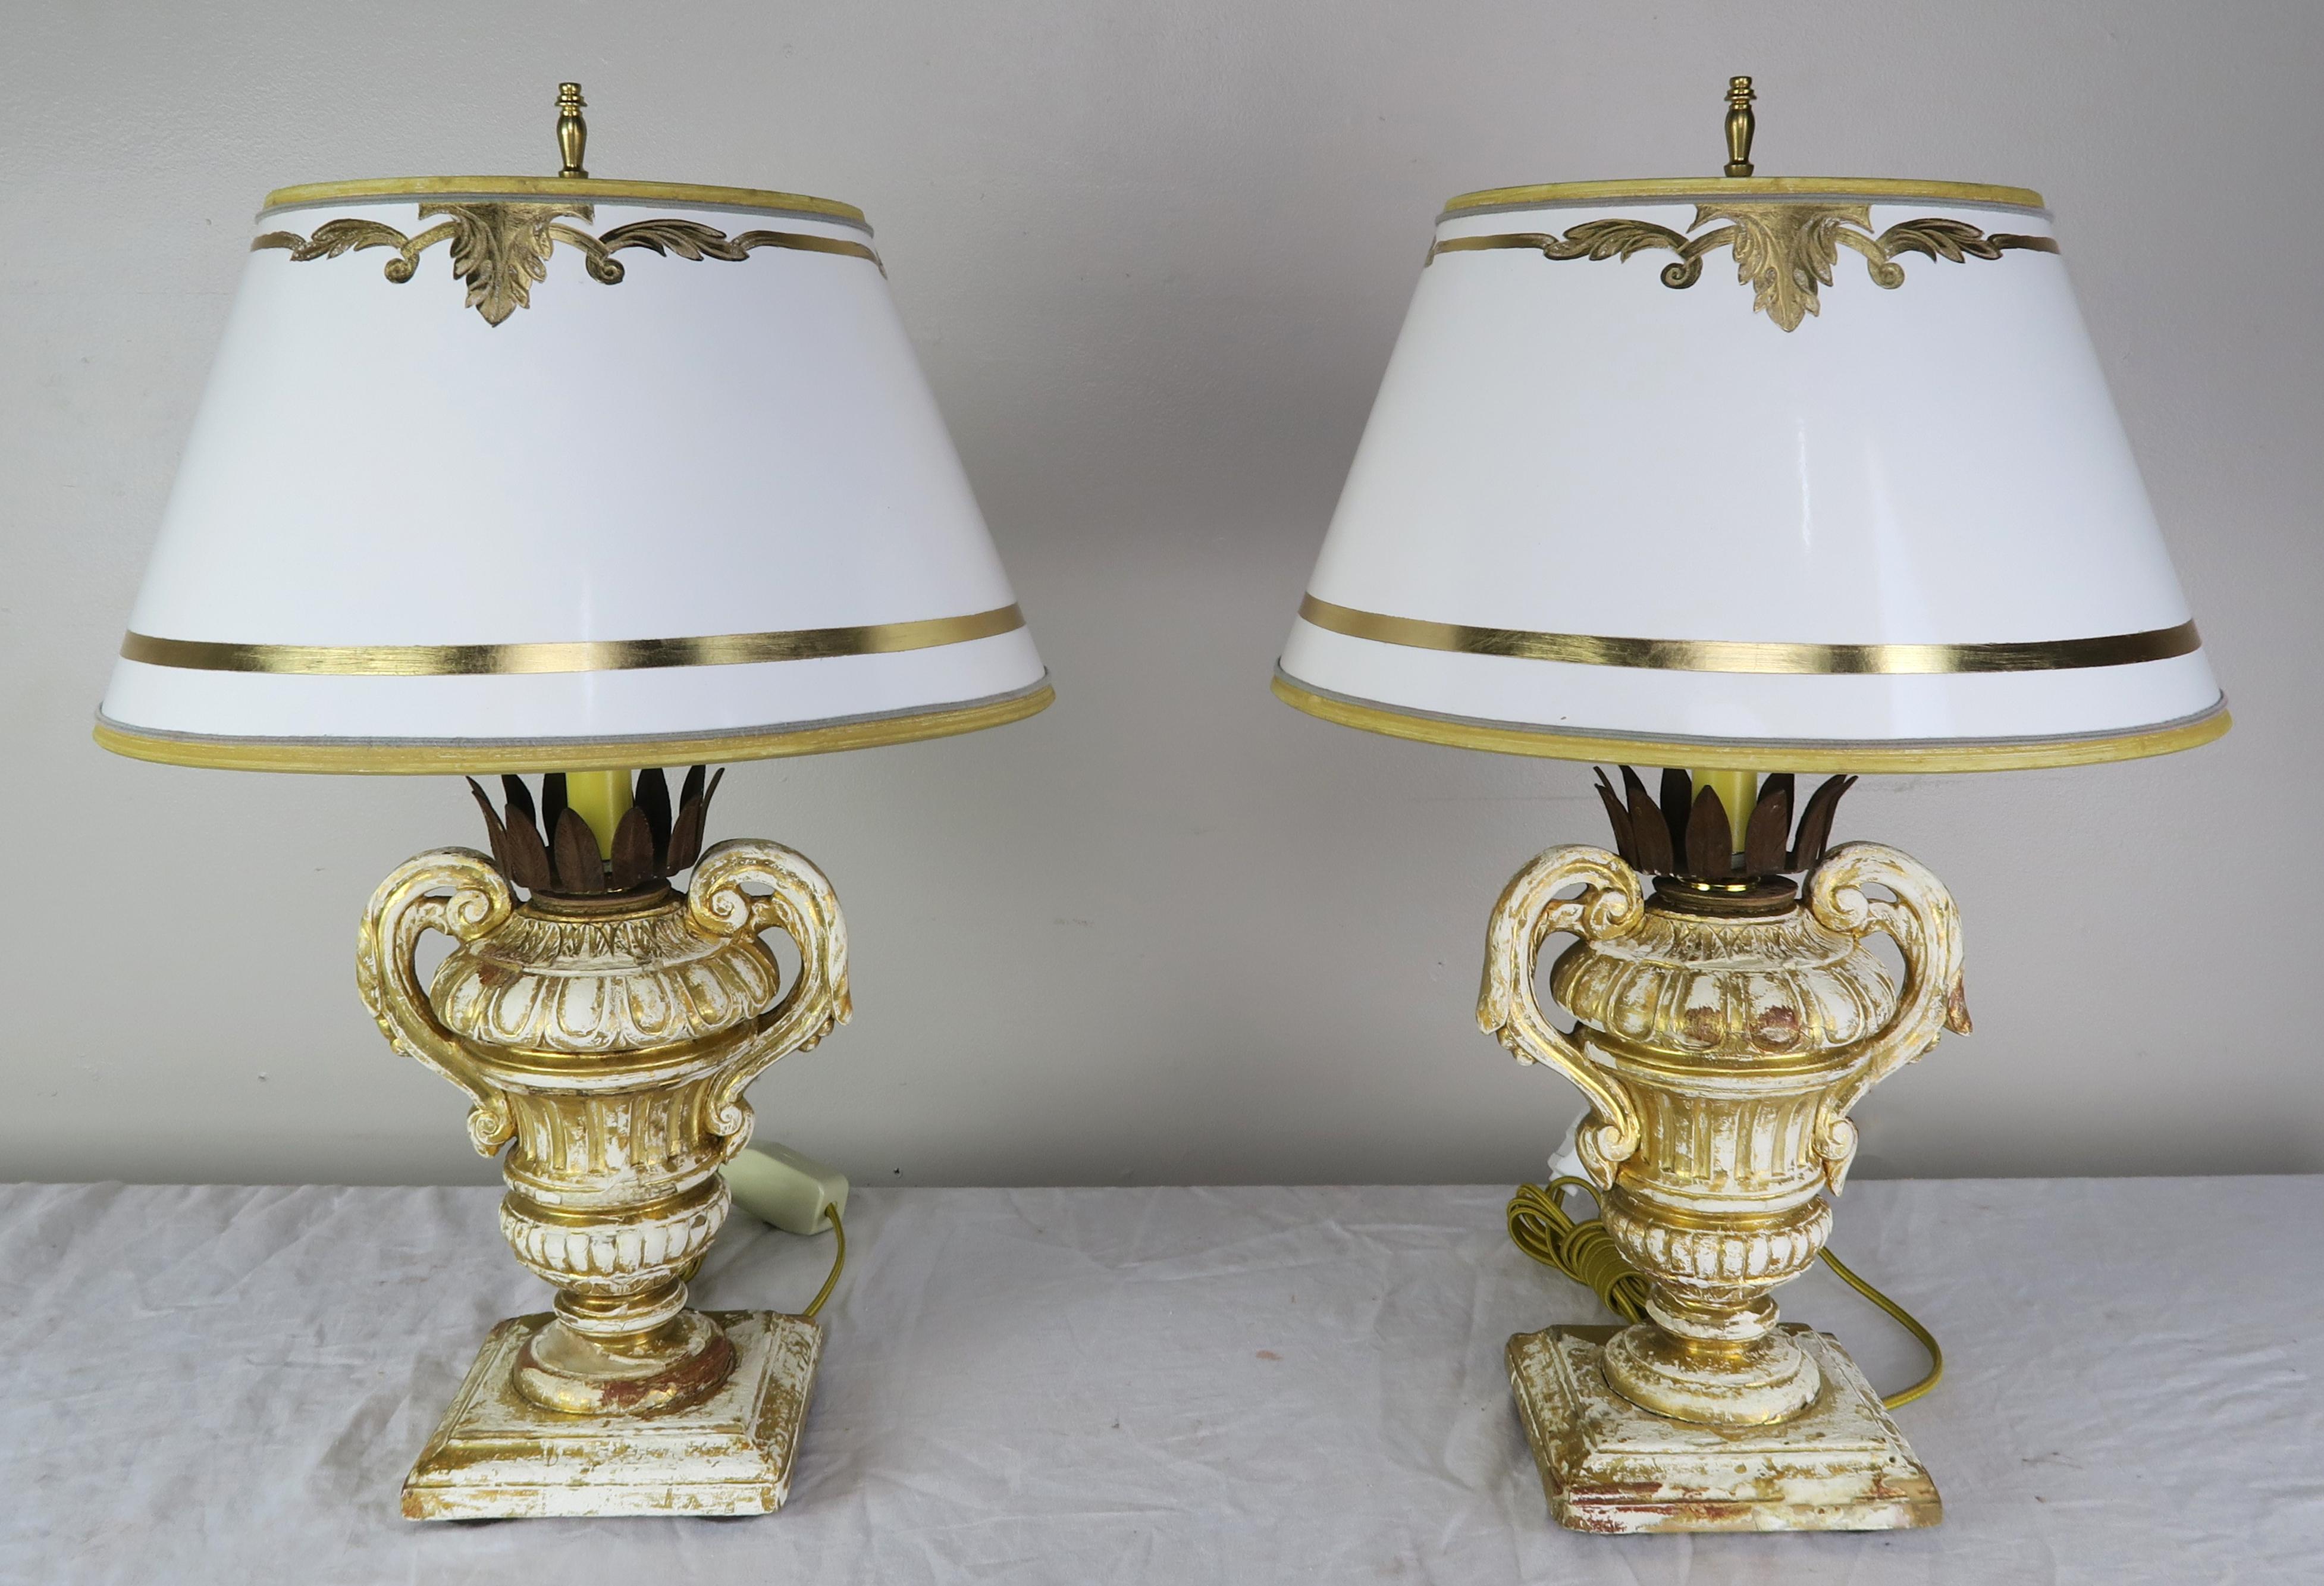 Pair of candleholders from the early 1900s. The handled urns have metal crown shaped bobeches that hold a candle that has been newly electrified into lamps. The lamps are crowned with hand painted parchment shades that coordinate perfectly with the